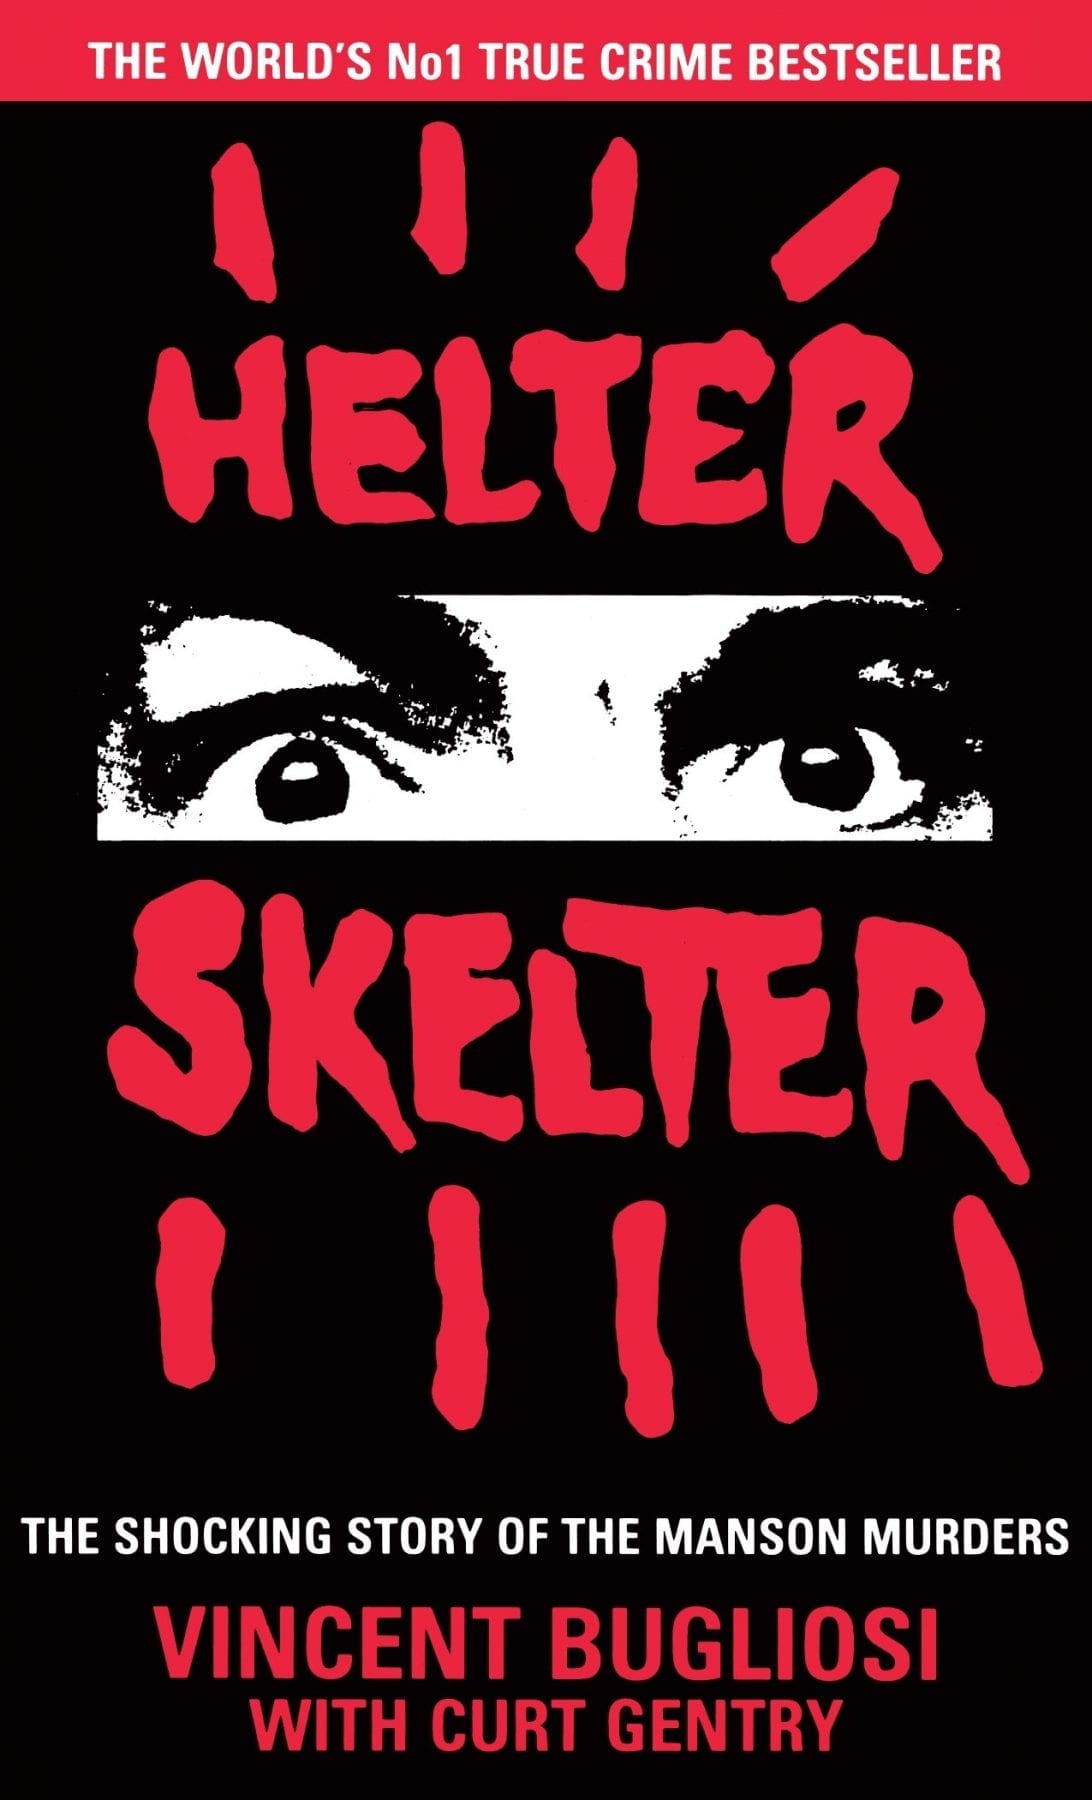 Helter Skelter: The True Story of the Manson Murders by Vincent Bugliosi